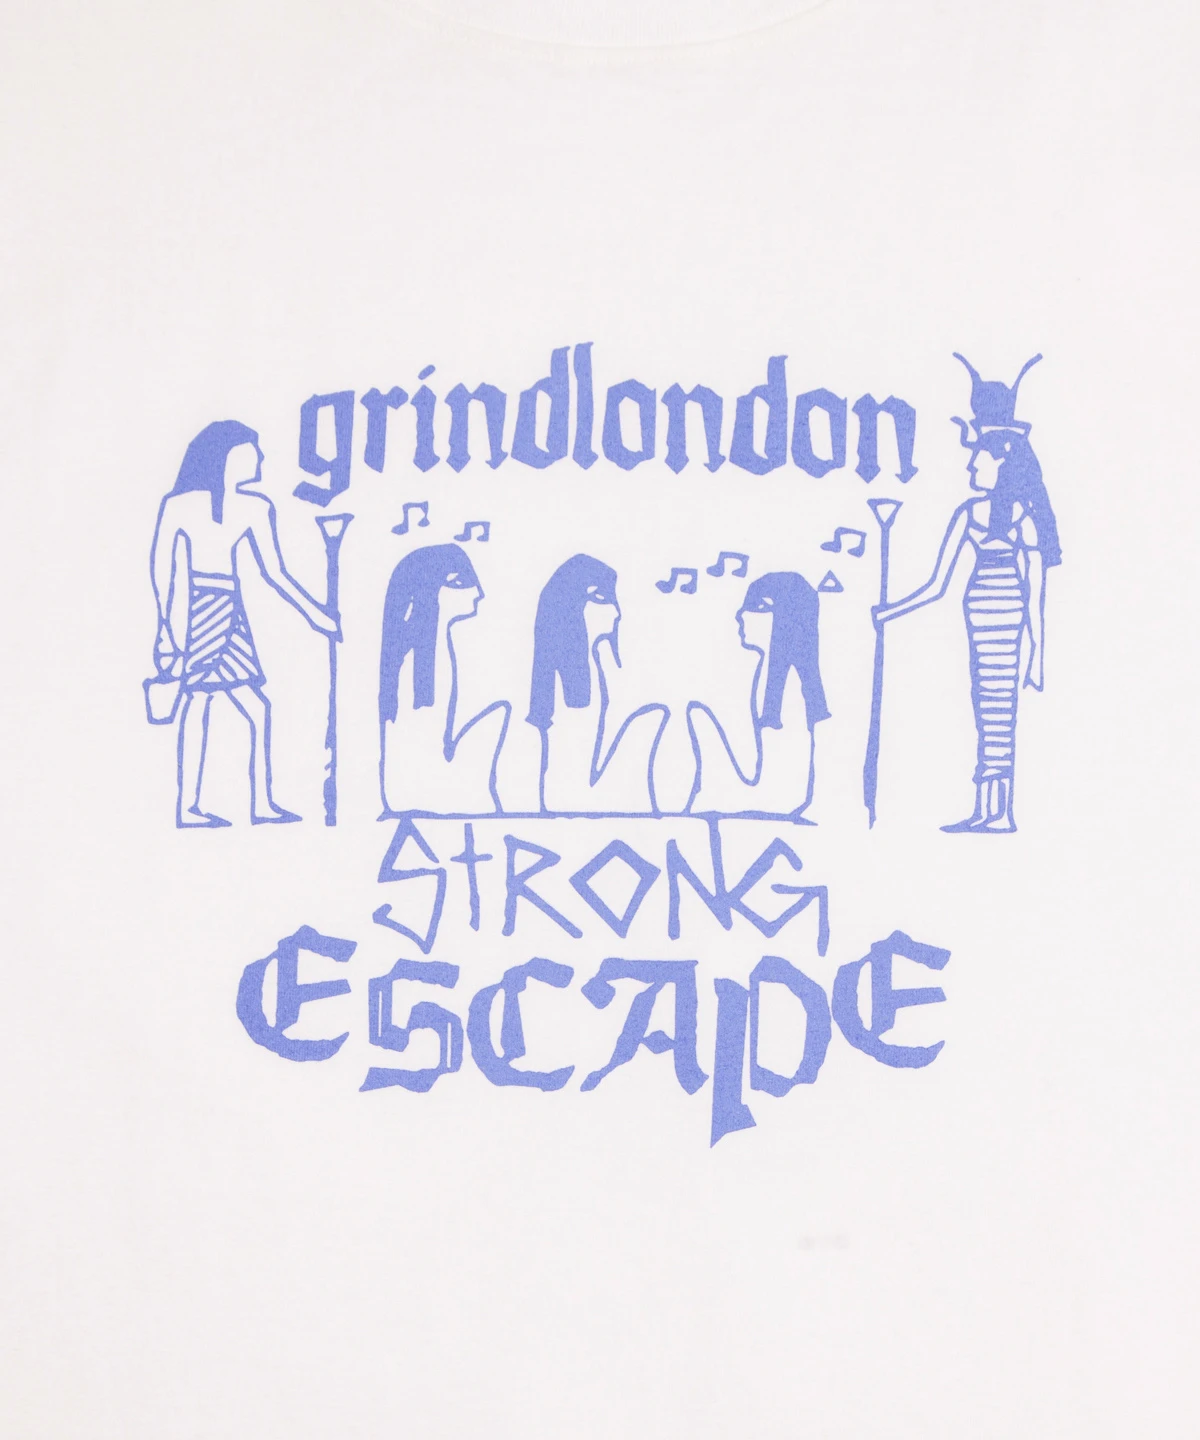 grindlondon 100% cotton t-shirt white strong escape hand screen printed